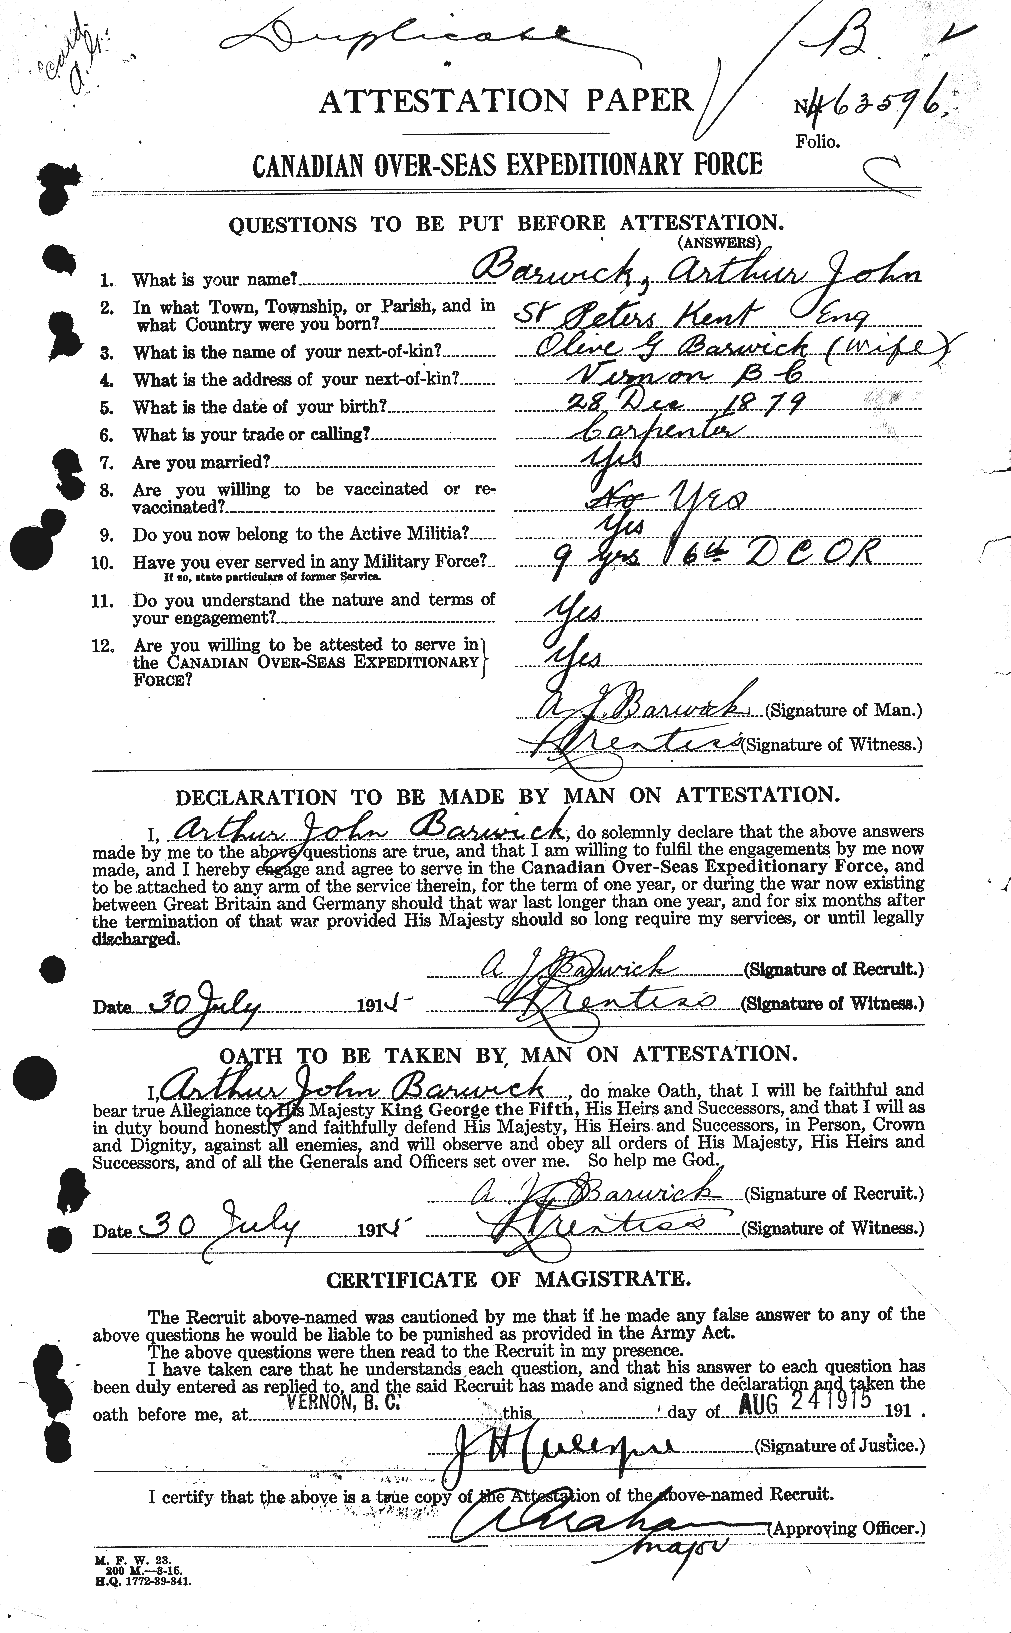 Personnel Records of the First World War - CEF 222002a